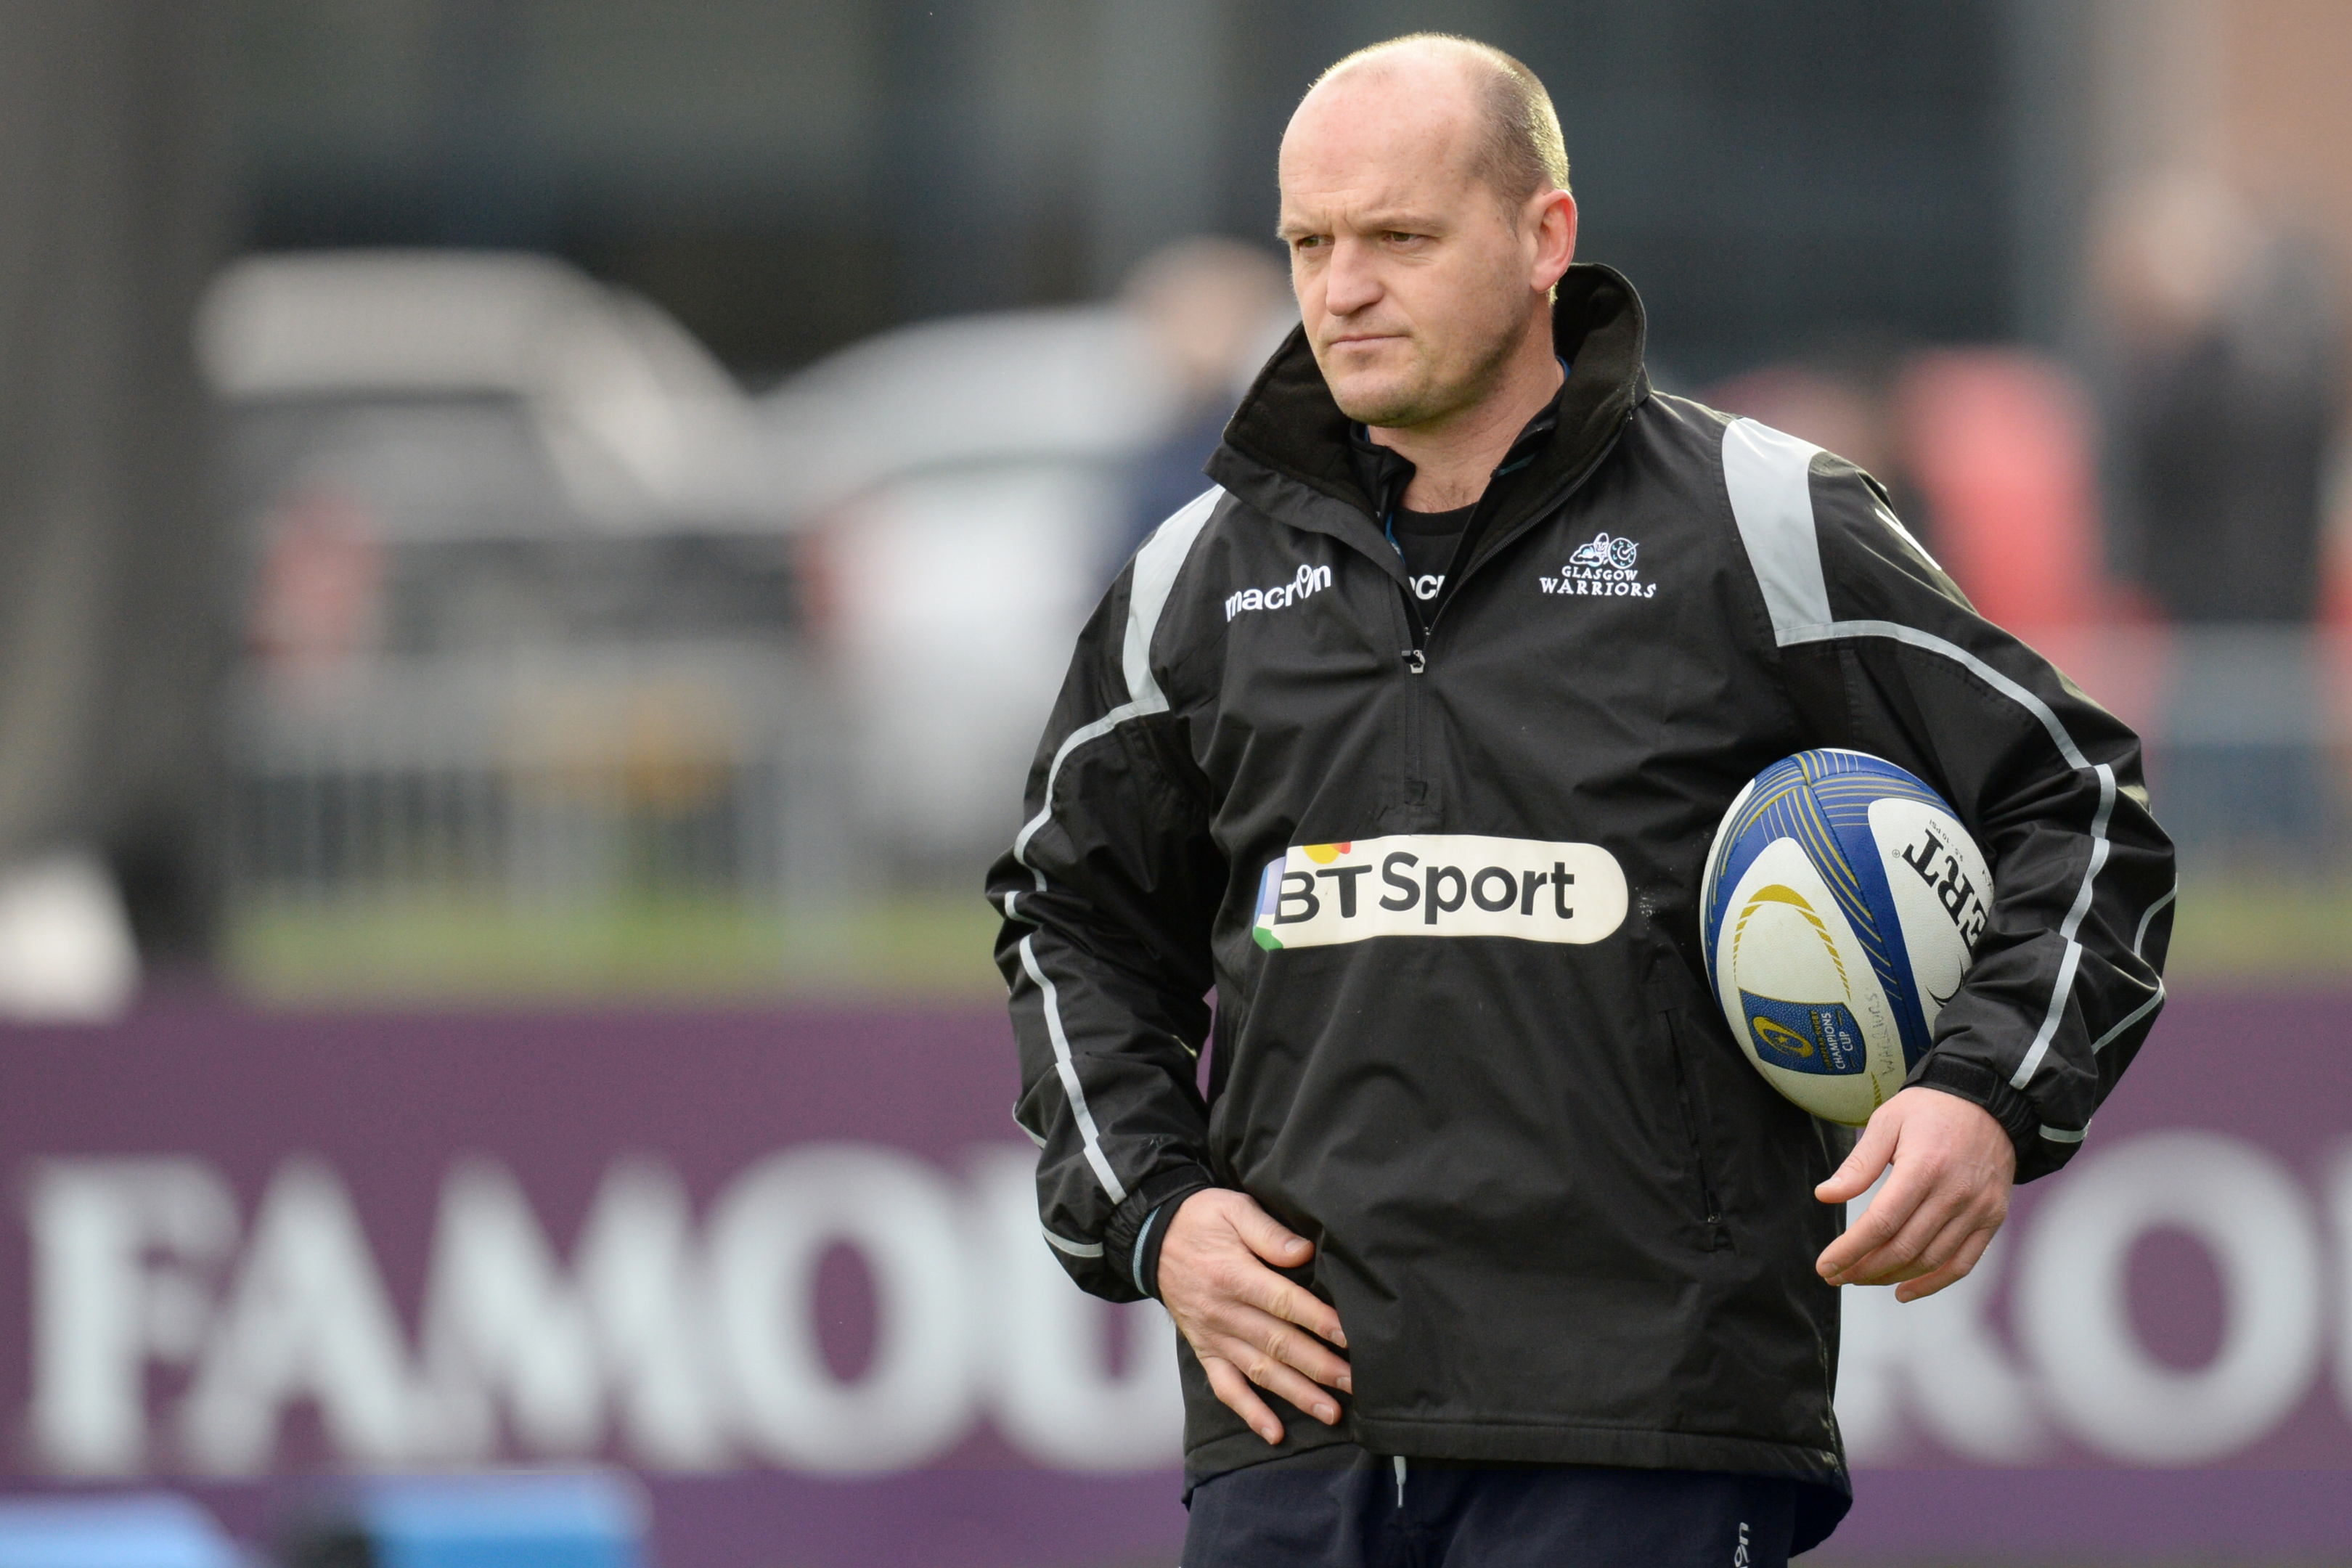 Gregor Townsend is the "outsanding Scottish coach of his generation", says Mark Dodson.